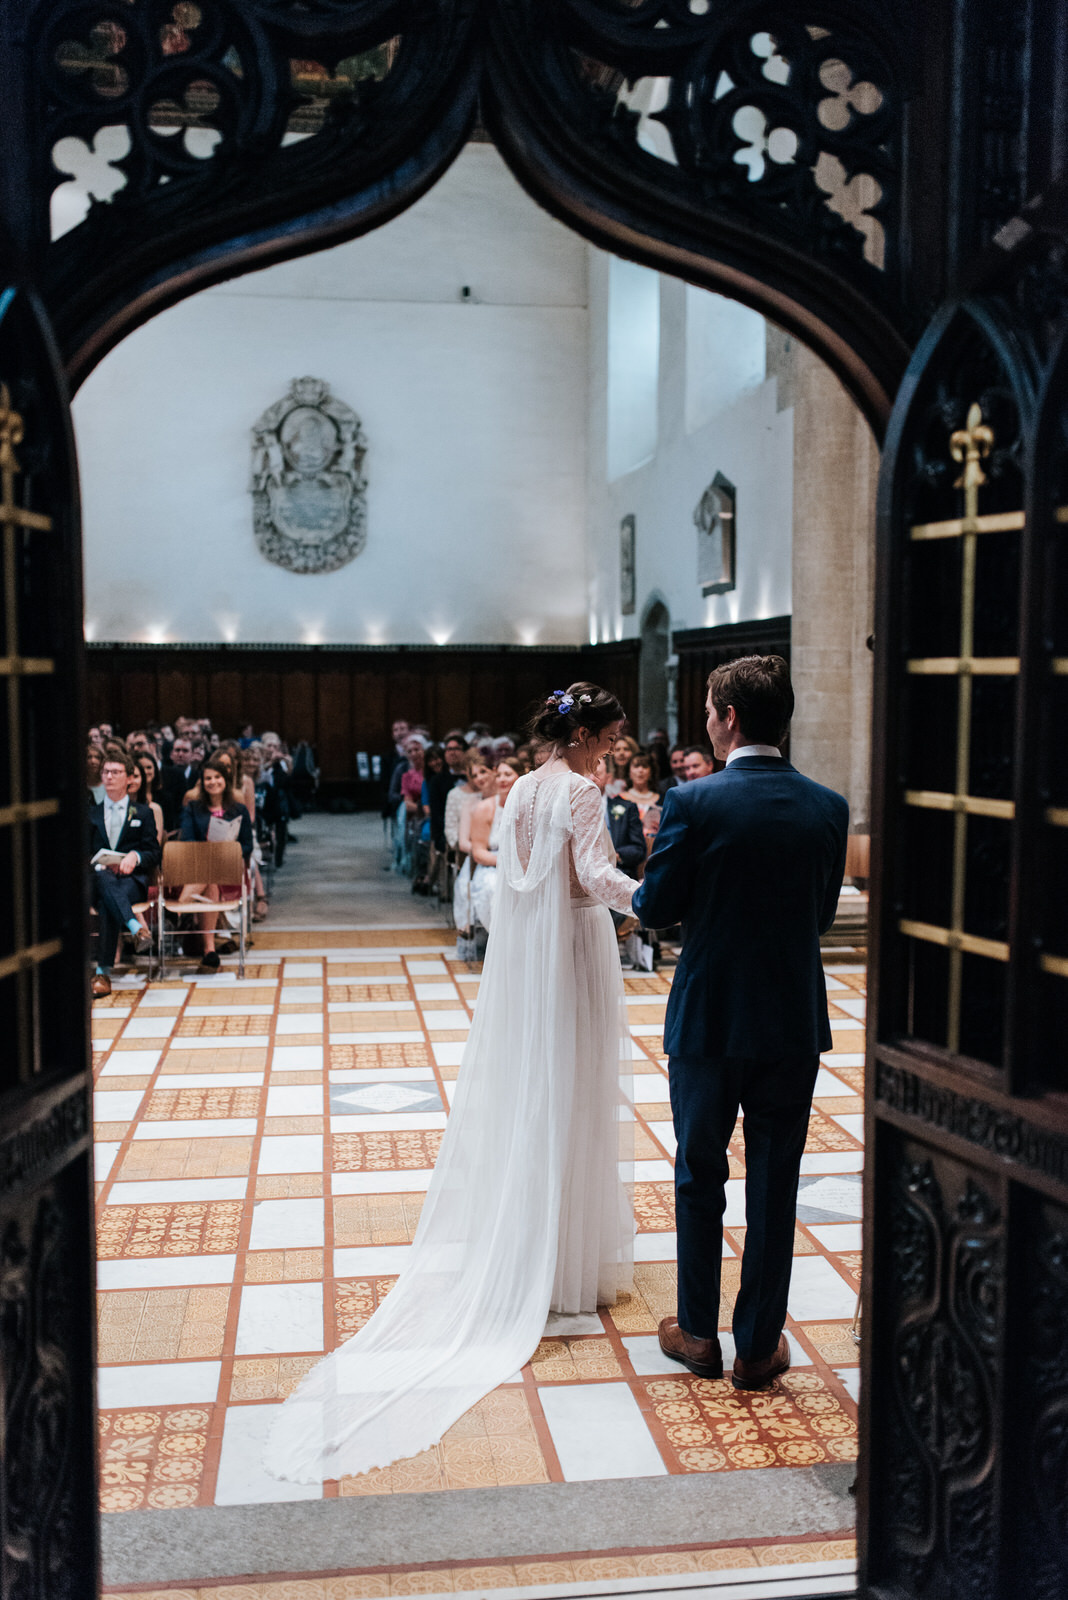 Bride and groom walk out towards guests during wedding ceremony